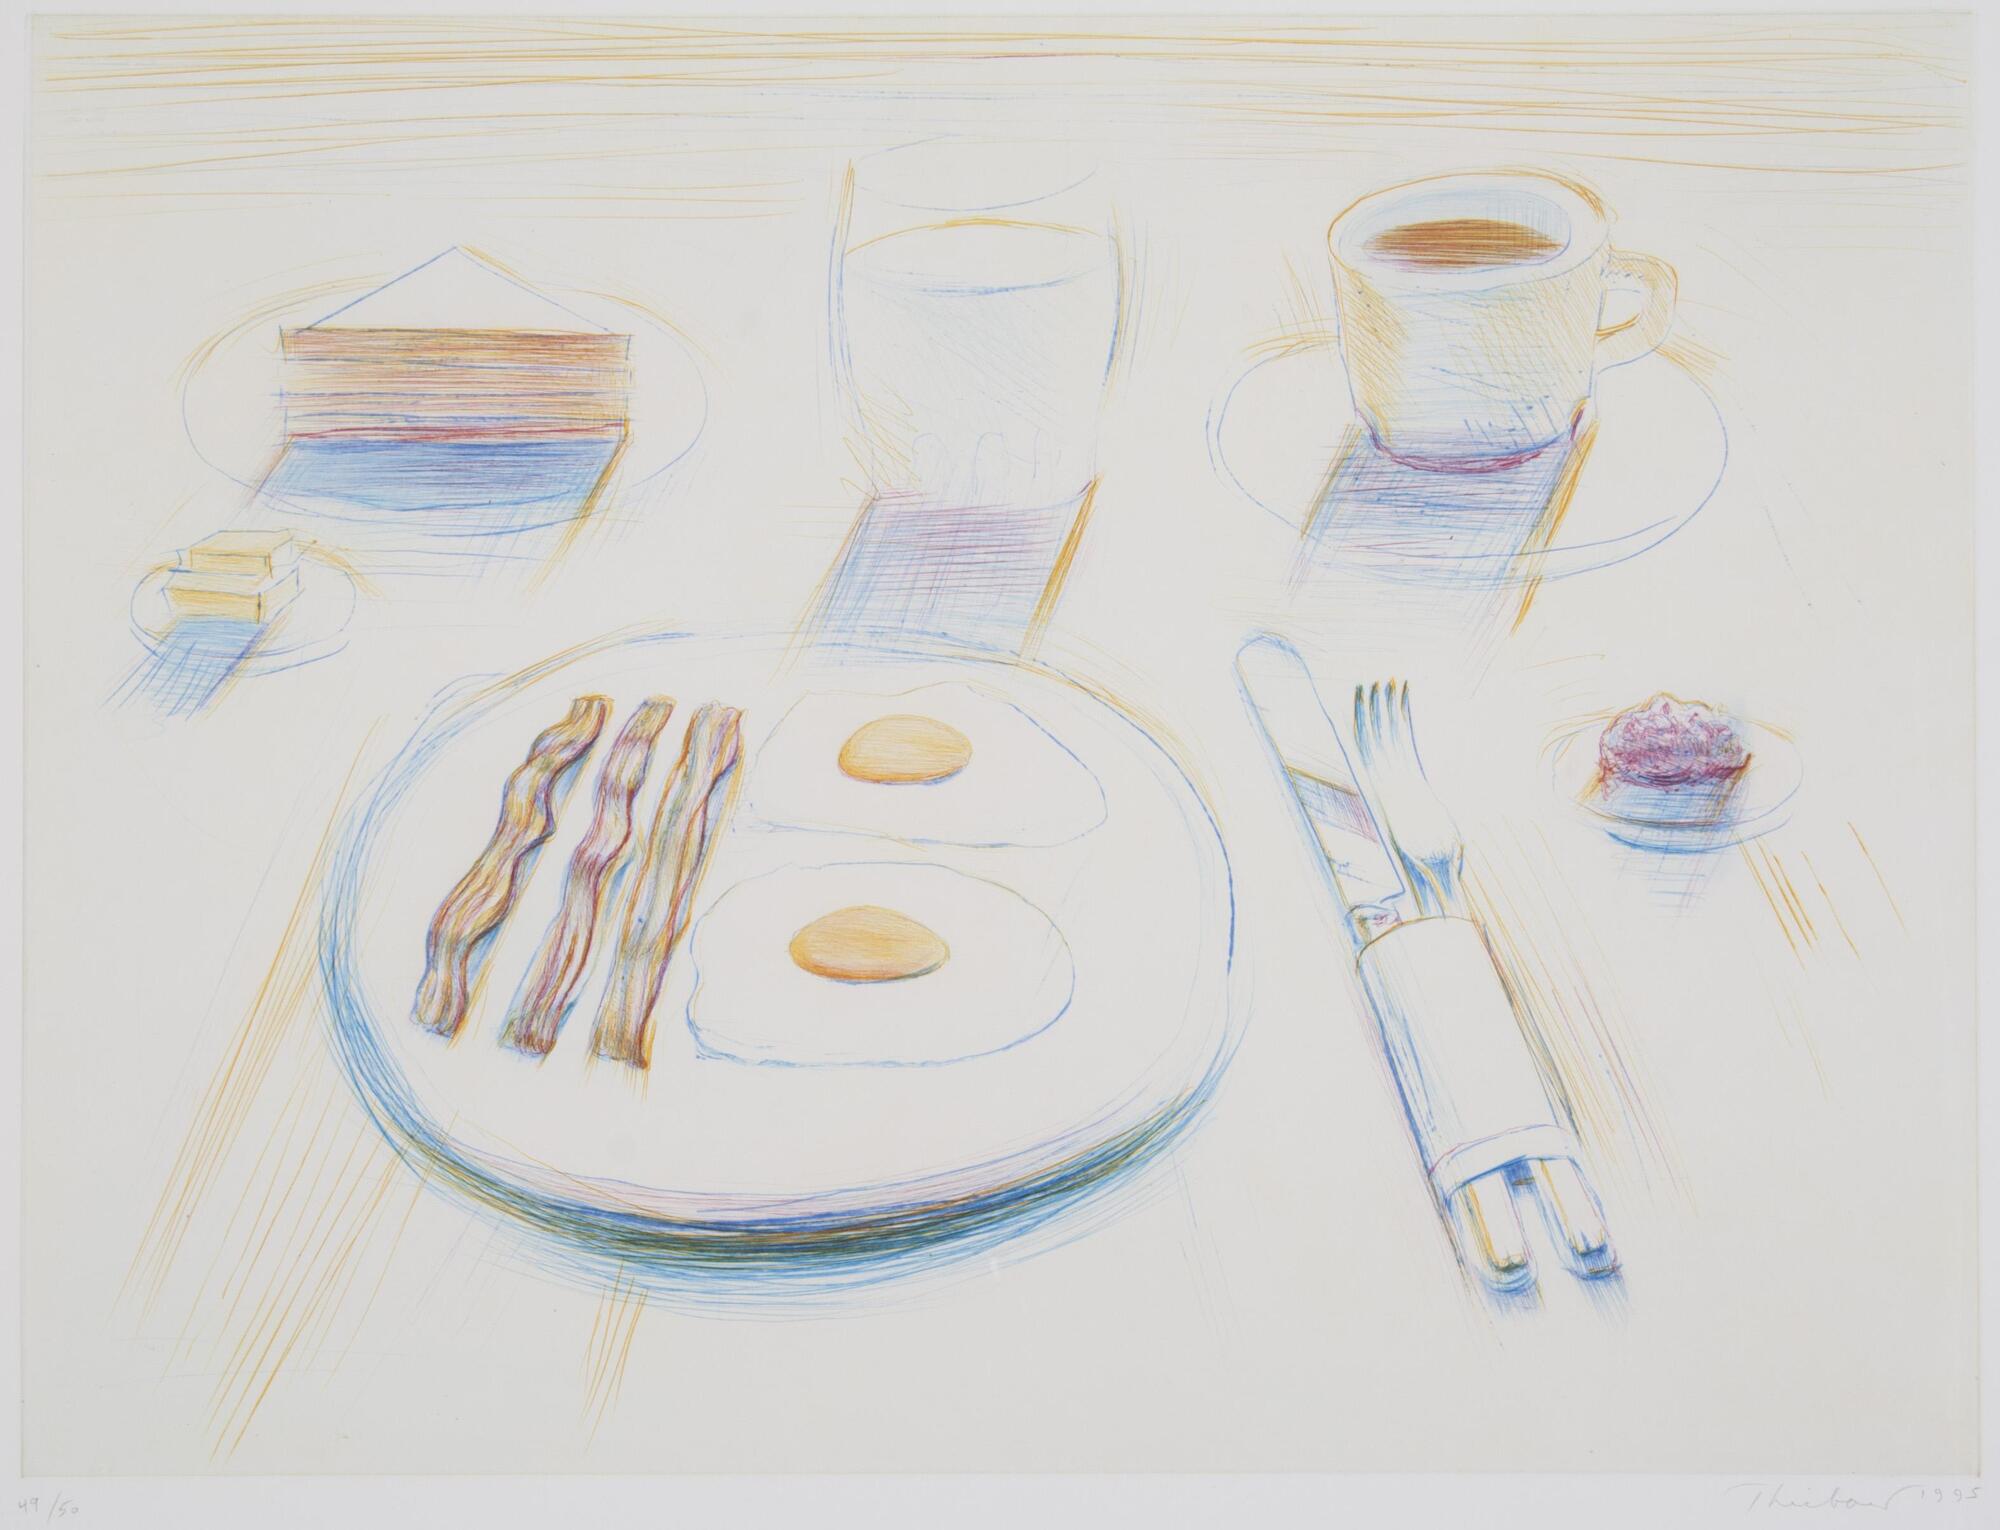 A color print of one place-setting at a table with breakfast foods—2 eggs sunnyside up, 3 strips of bacon, toast, coffee, milk—and utensils. 